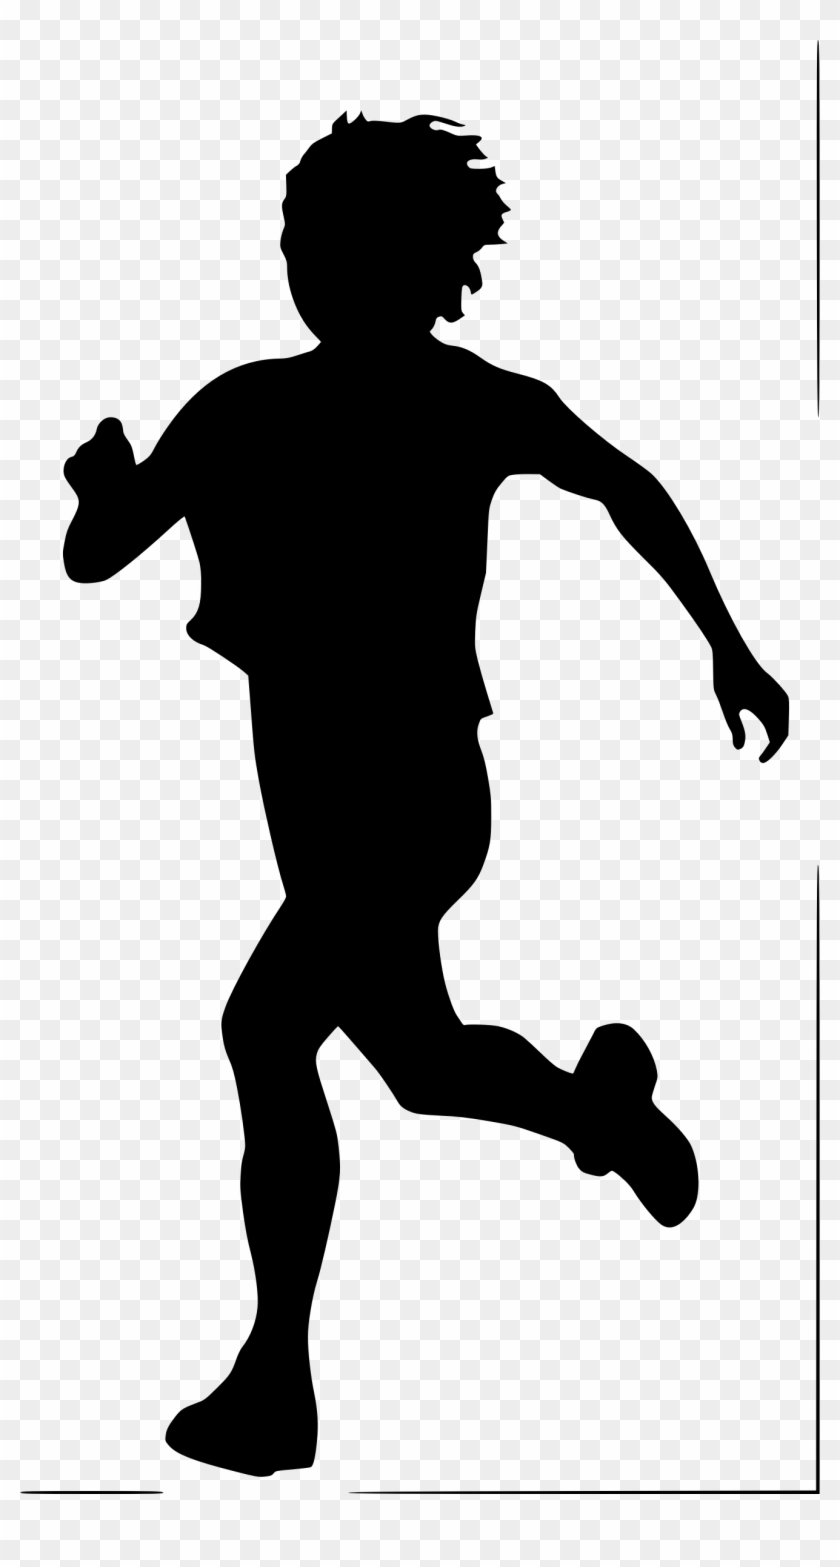 Silhouette People Running - Kid Running Silhouette Clipart #277723